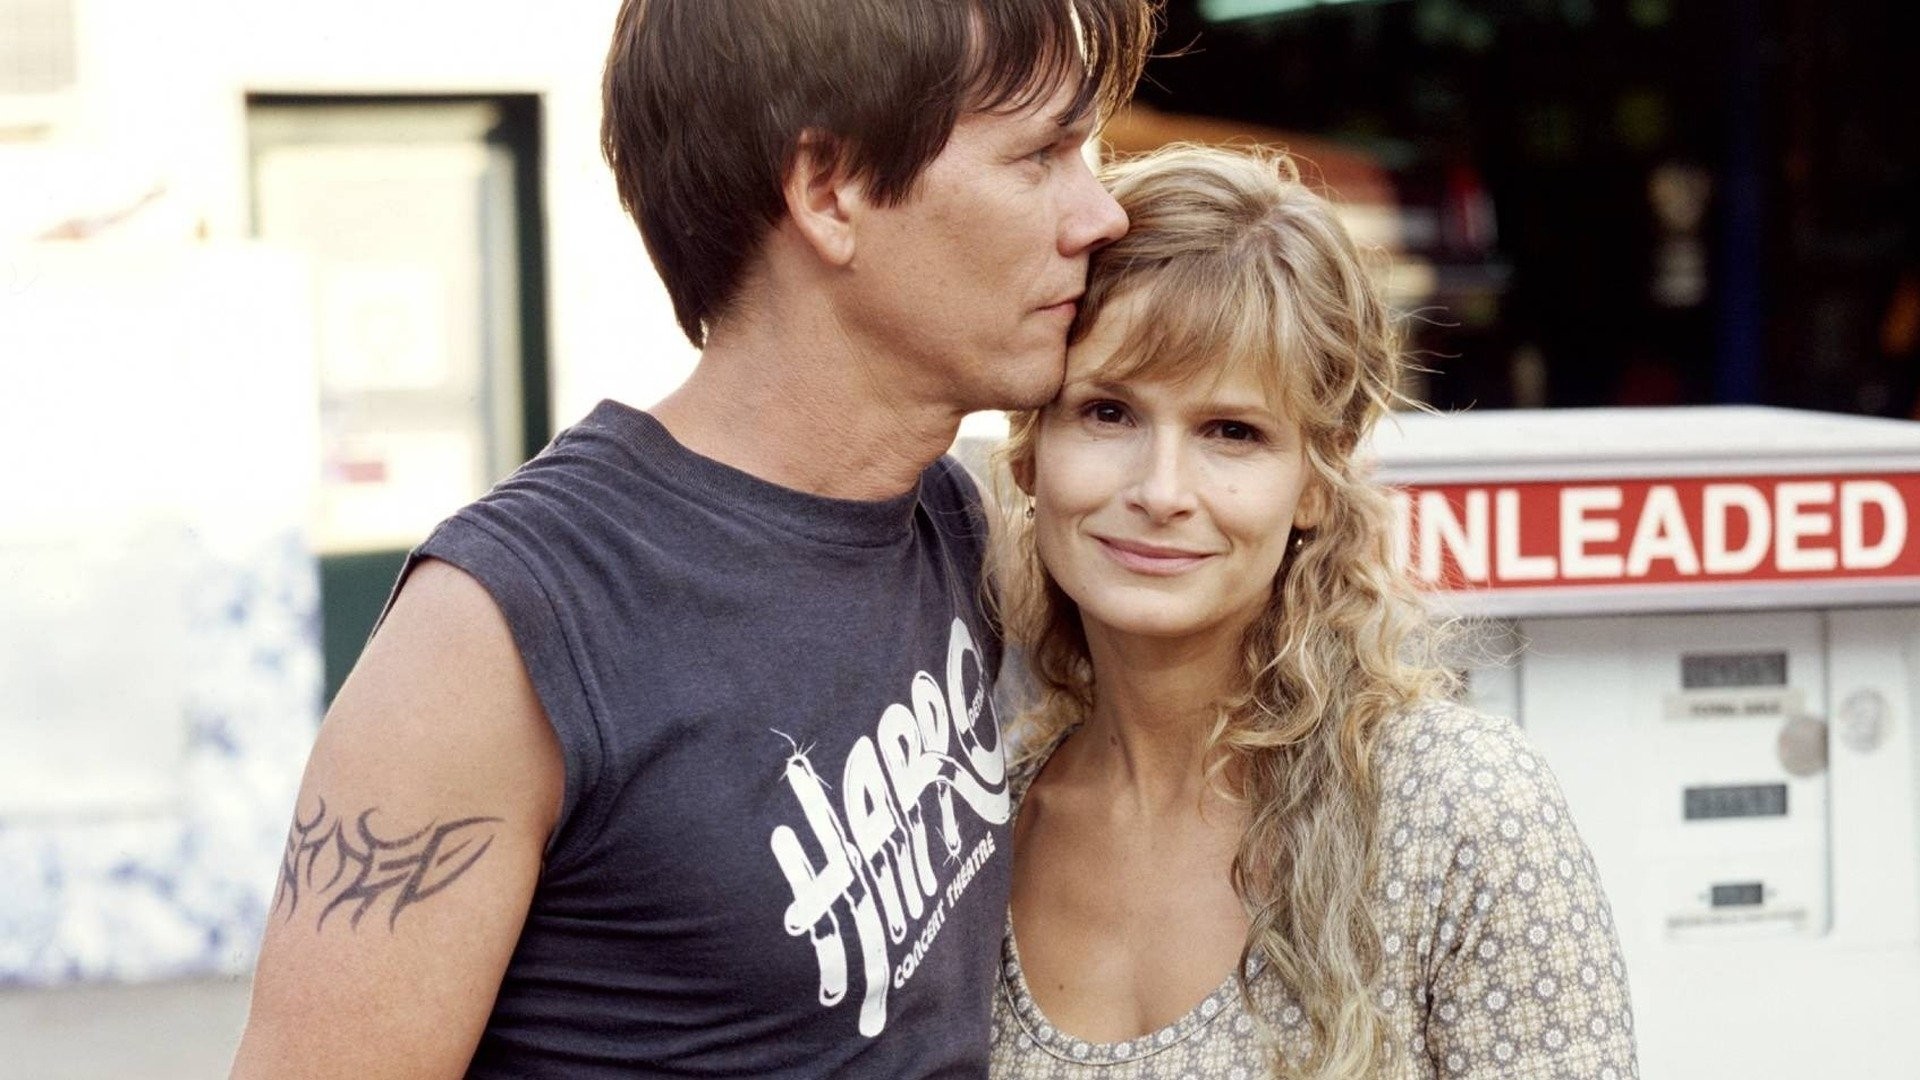 Connescence: Kevin Bacon and Kyra Sedgwick Reunite for First Movie in 20 Years